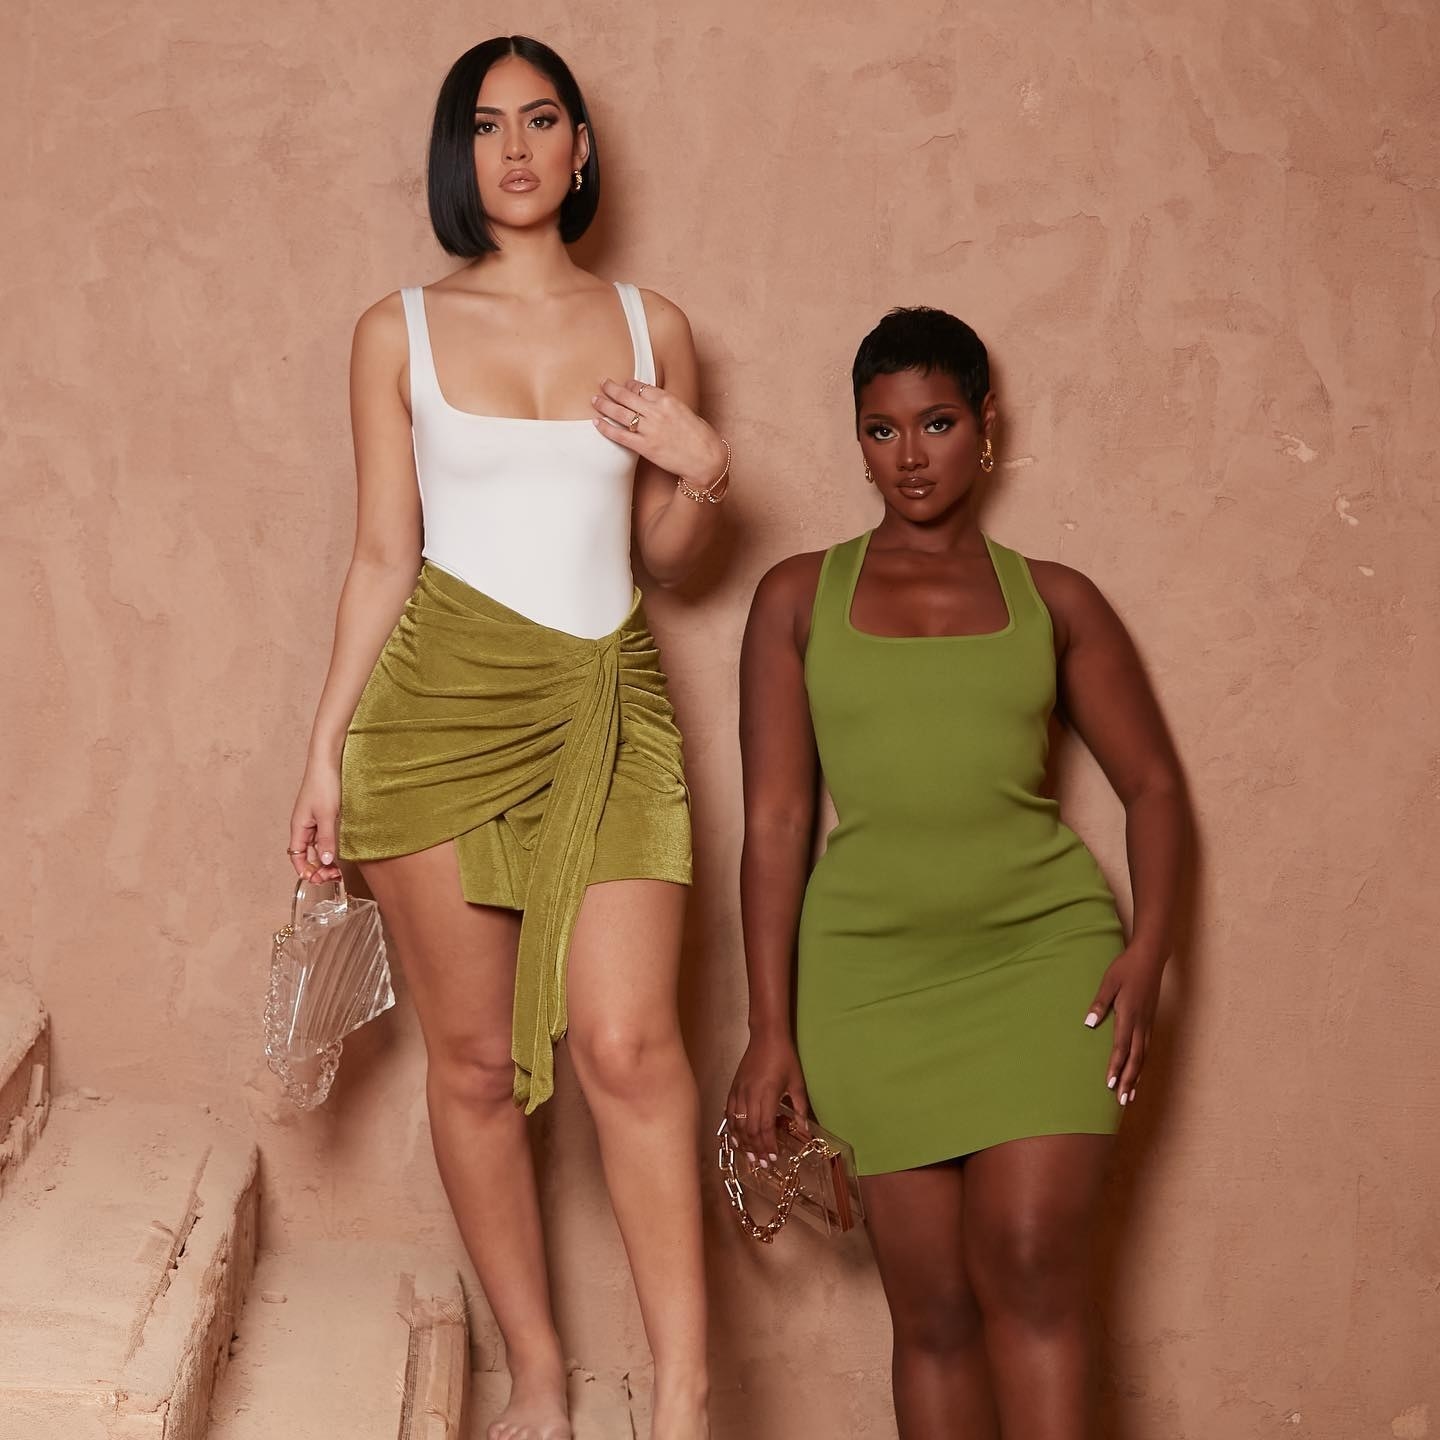 a model wearing a white swimsuit and a green skirt next to a model wearing a green dress